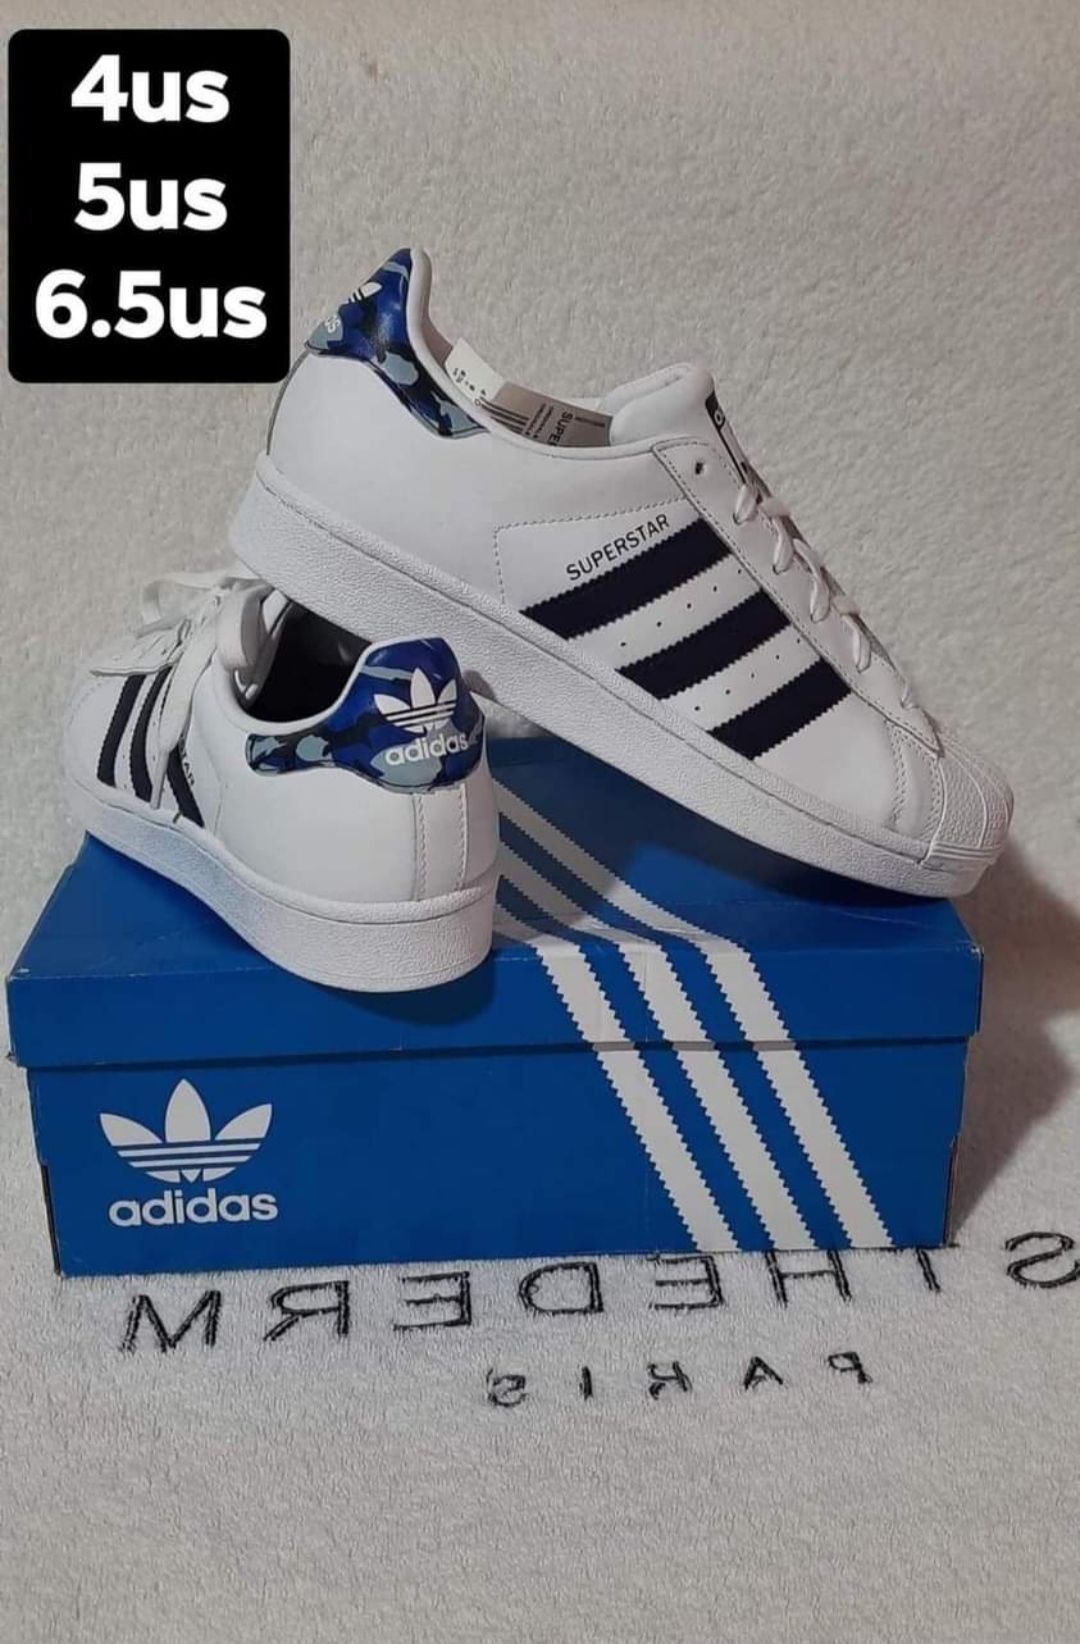 original adidas superstar J for men and FTWWHT/CONAVY/FTWWHT  available size:5us made in is on hand Lazada PH